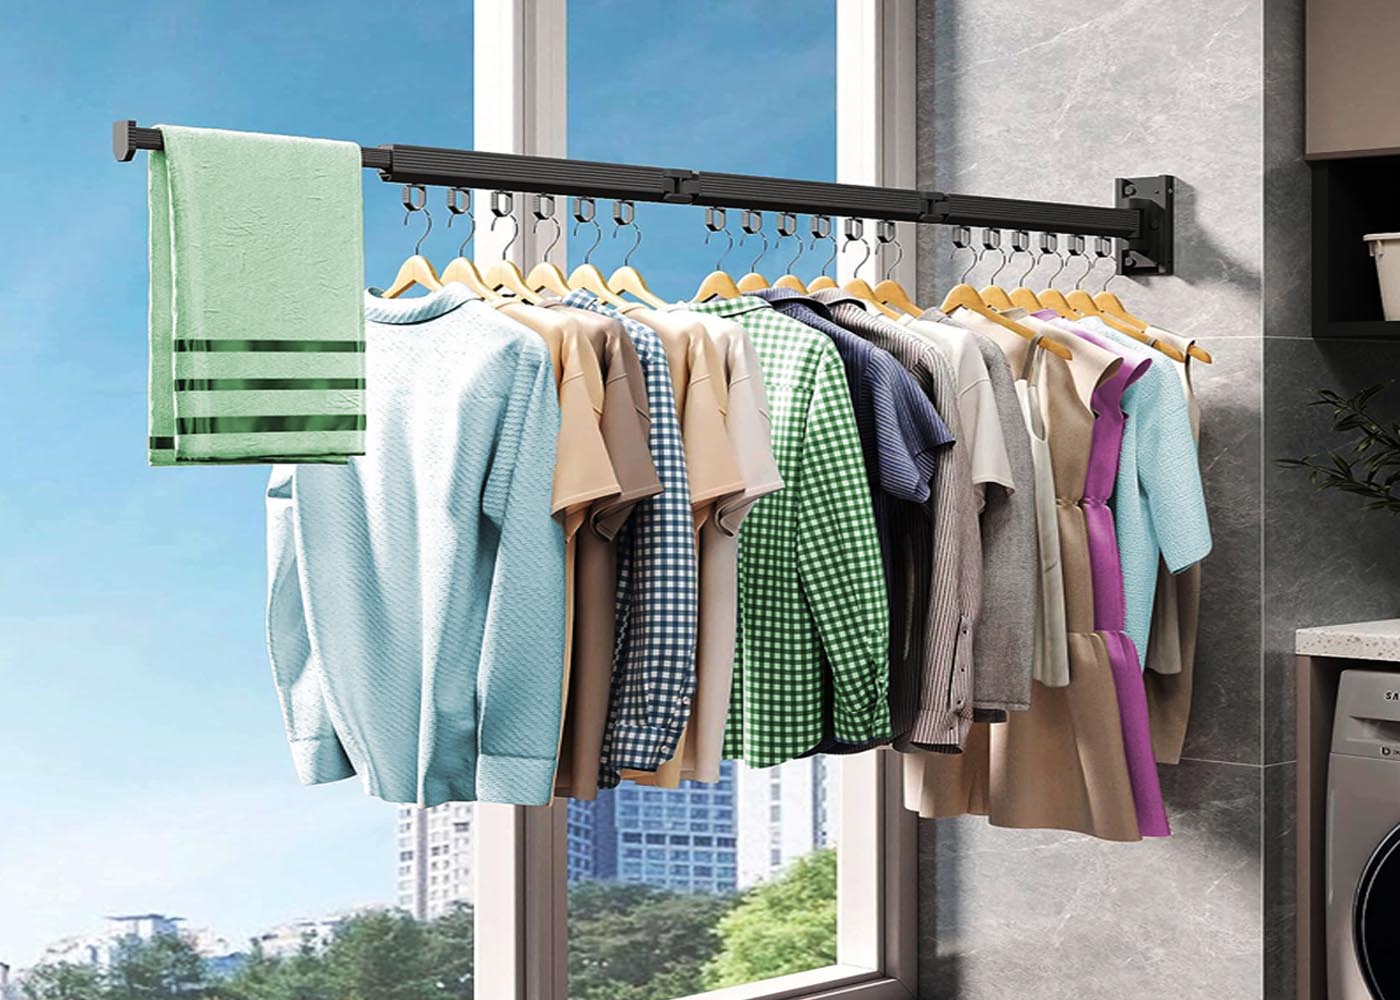 Air Drying 101: Wall-Mounted Hangers for Fresh and Clean Clothes